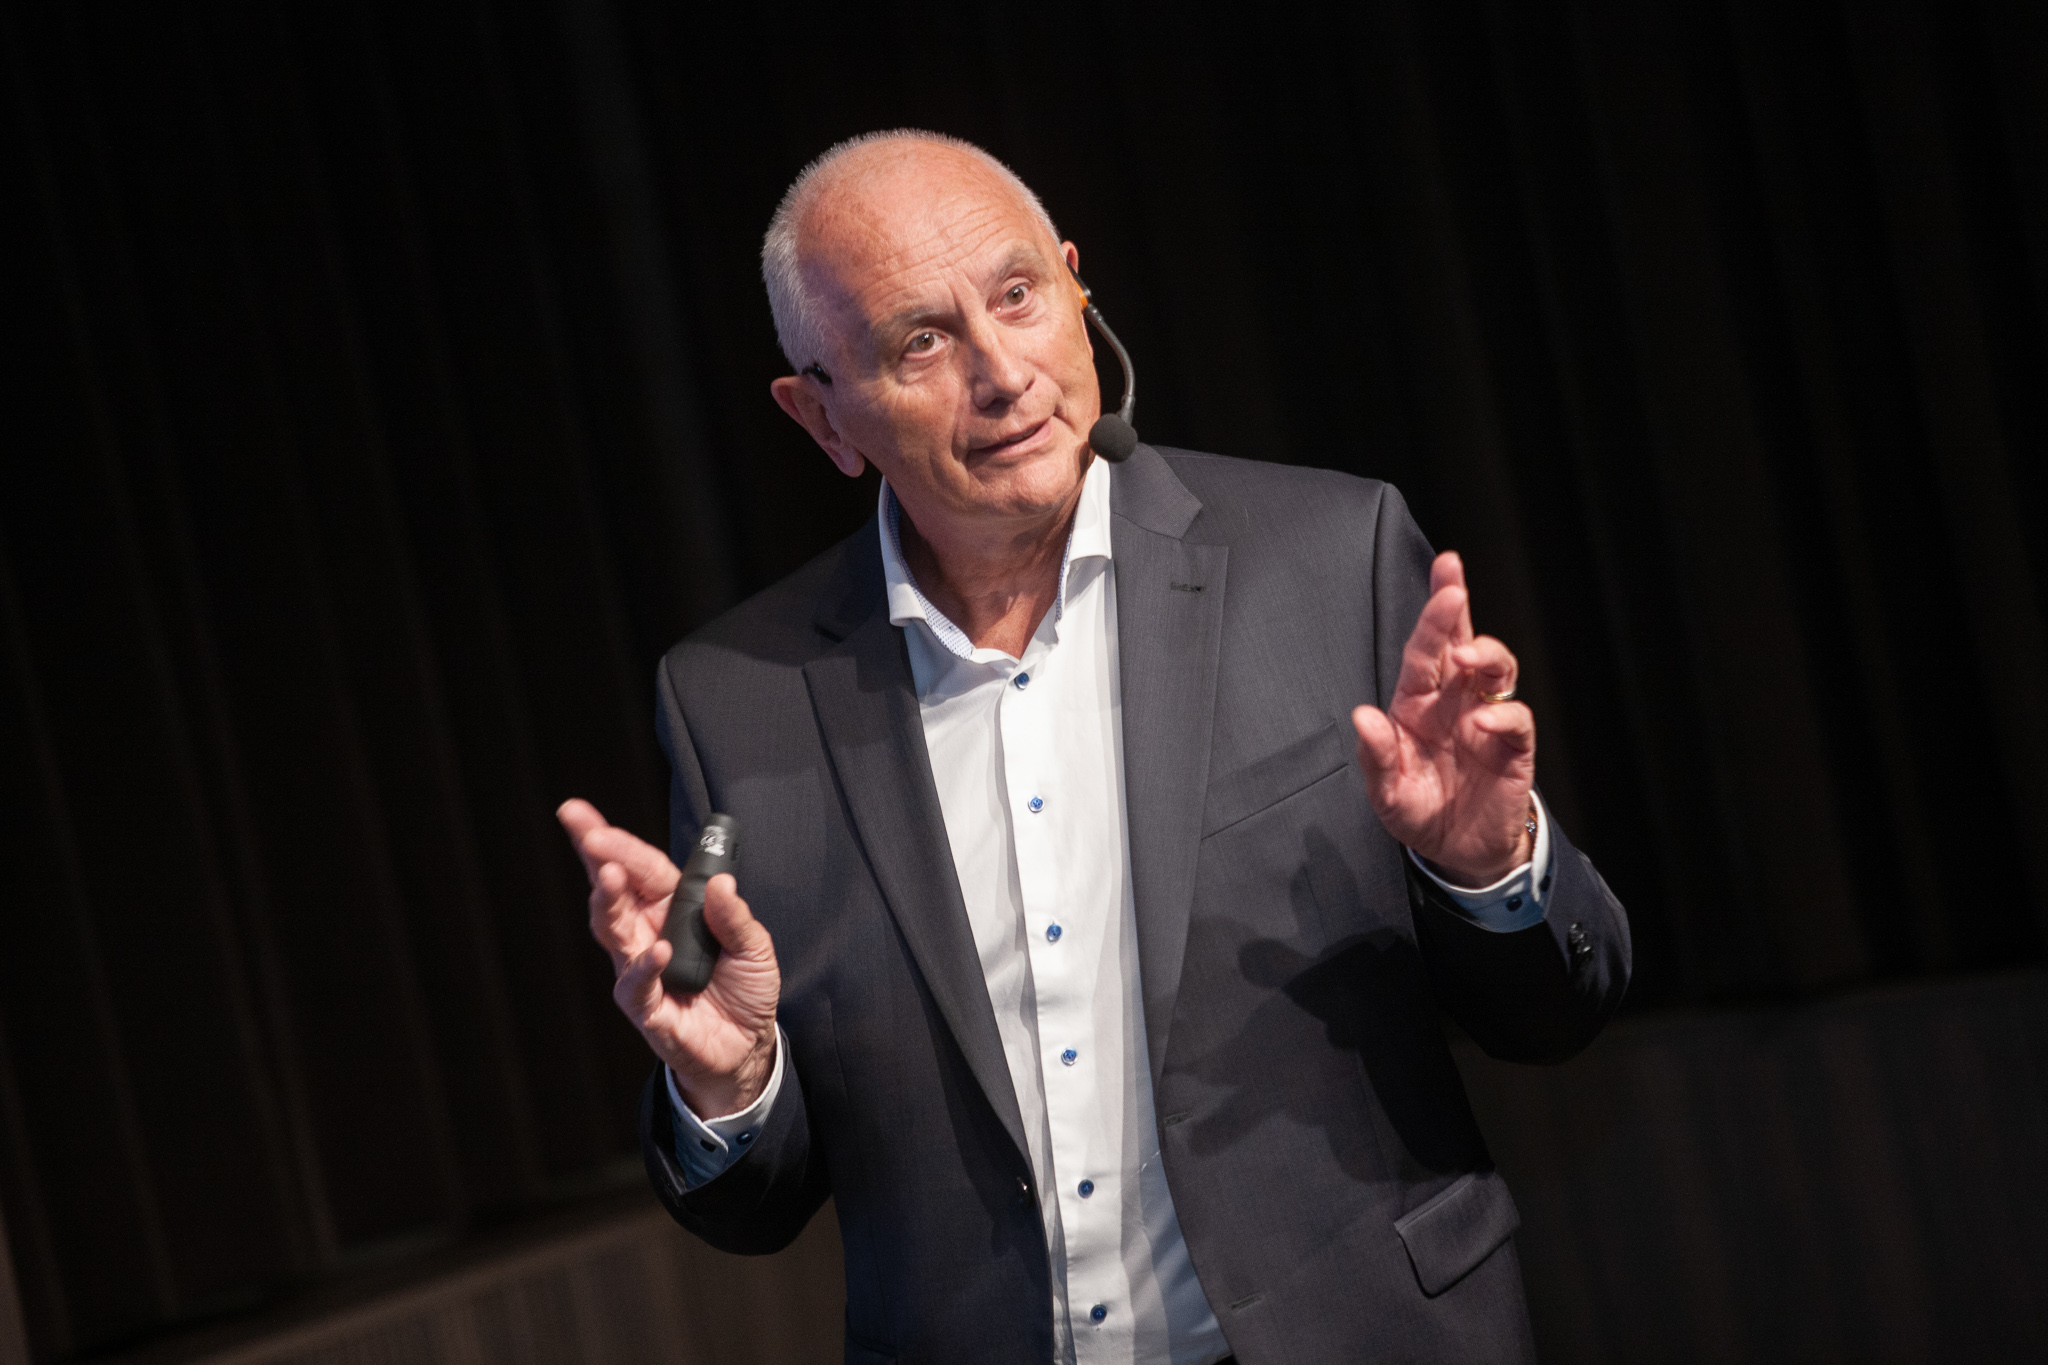 We are more than thrilled and enthusiastic to have Johnny Thijs, former CEO BPost and currently member of several Boards (Essers, Recticel,…) as our keynote speaker on: “How to manage your business in a period of global disaster?”